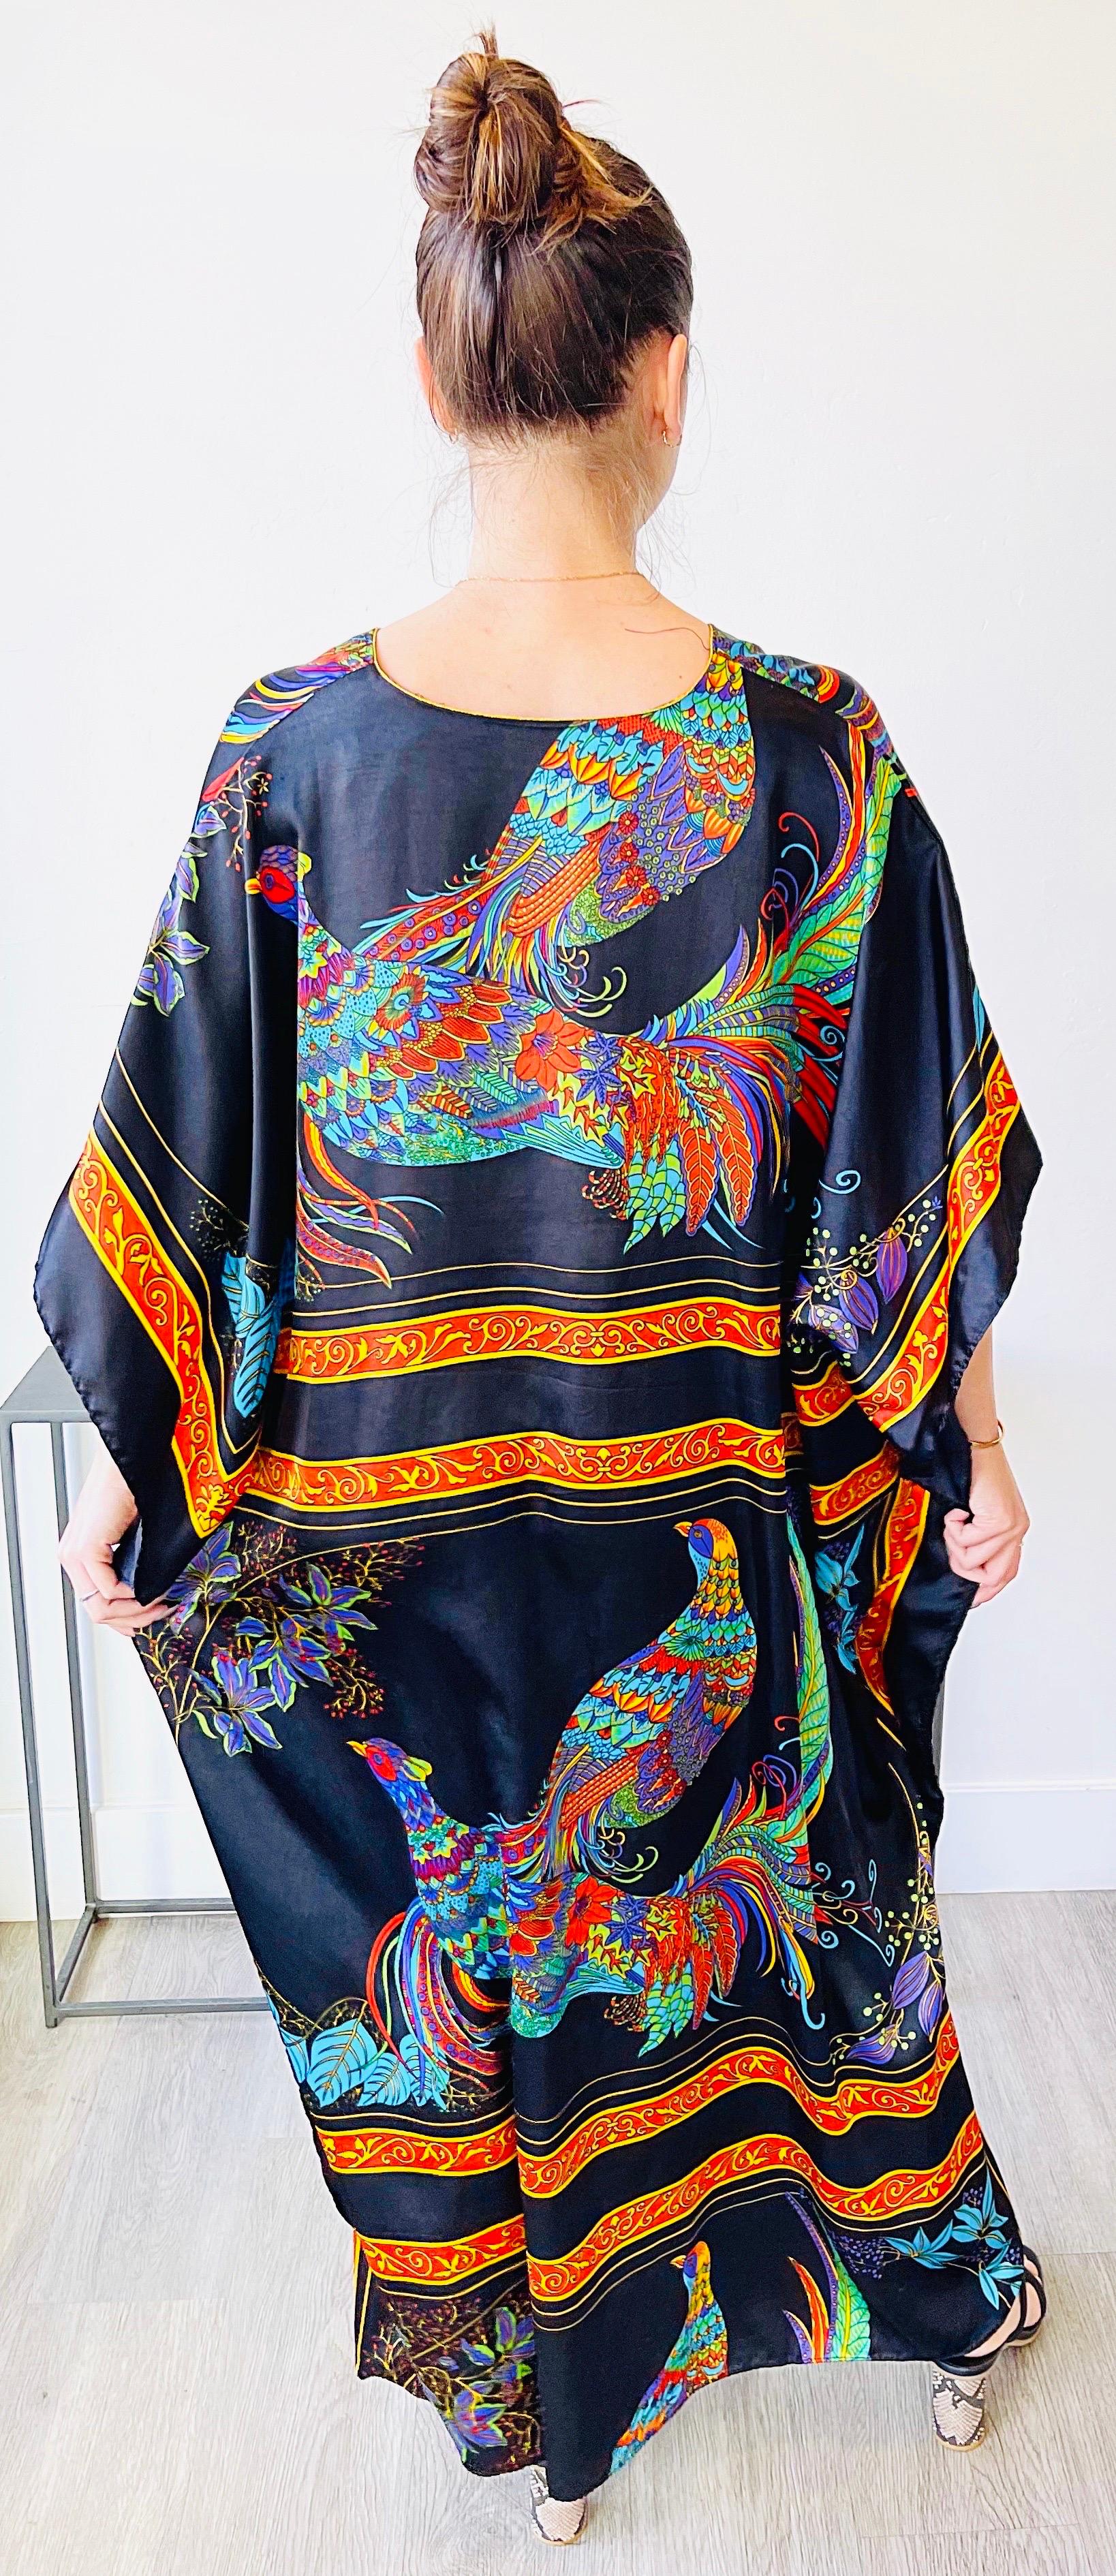 Amazing vintage pheasant bird print caftan! Features bright colors of blue, green, turquoise, orange, yellow, and red on a black background.
One size fits most
In great condition 